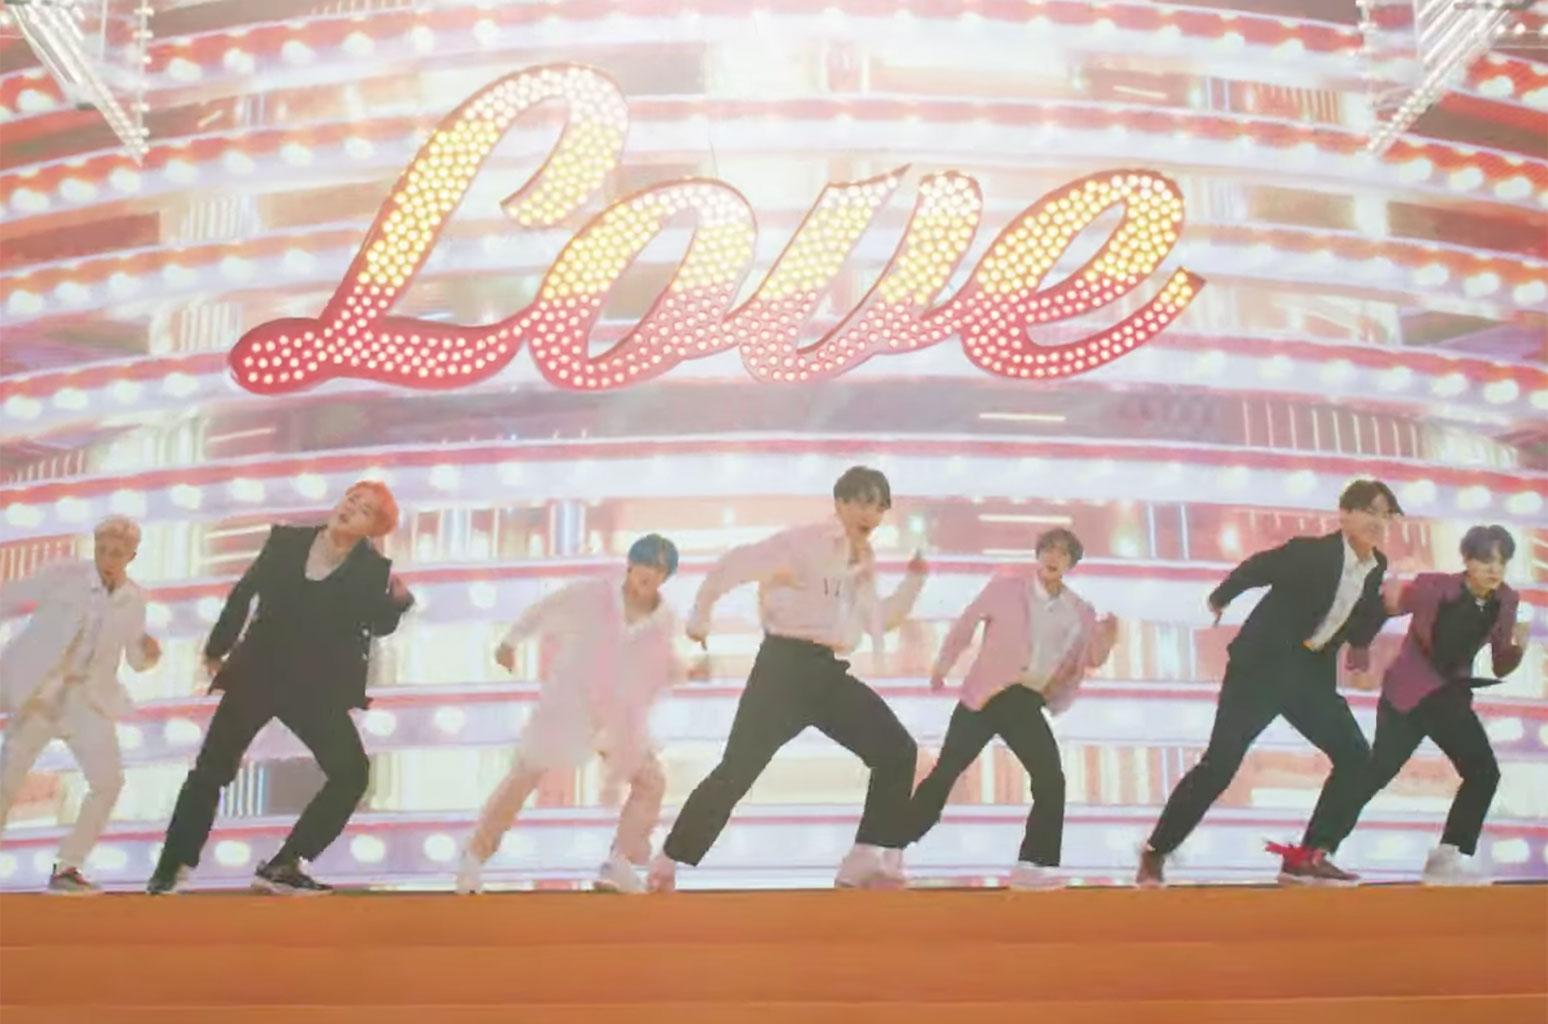 BTS Dance with Halsey in 'Boy With Luv' Music Video: Watch